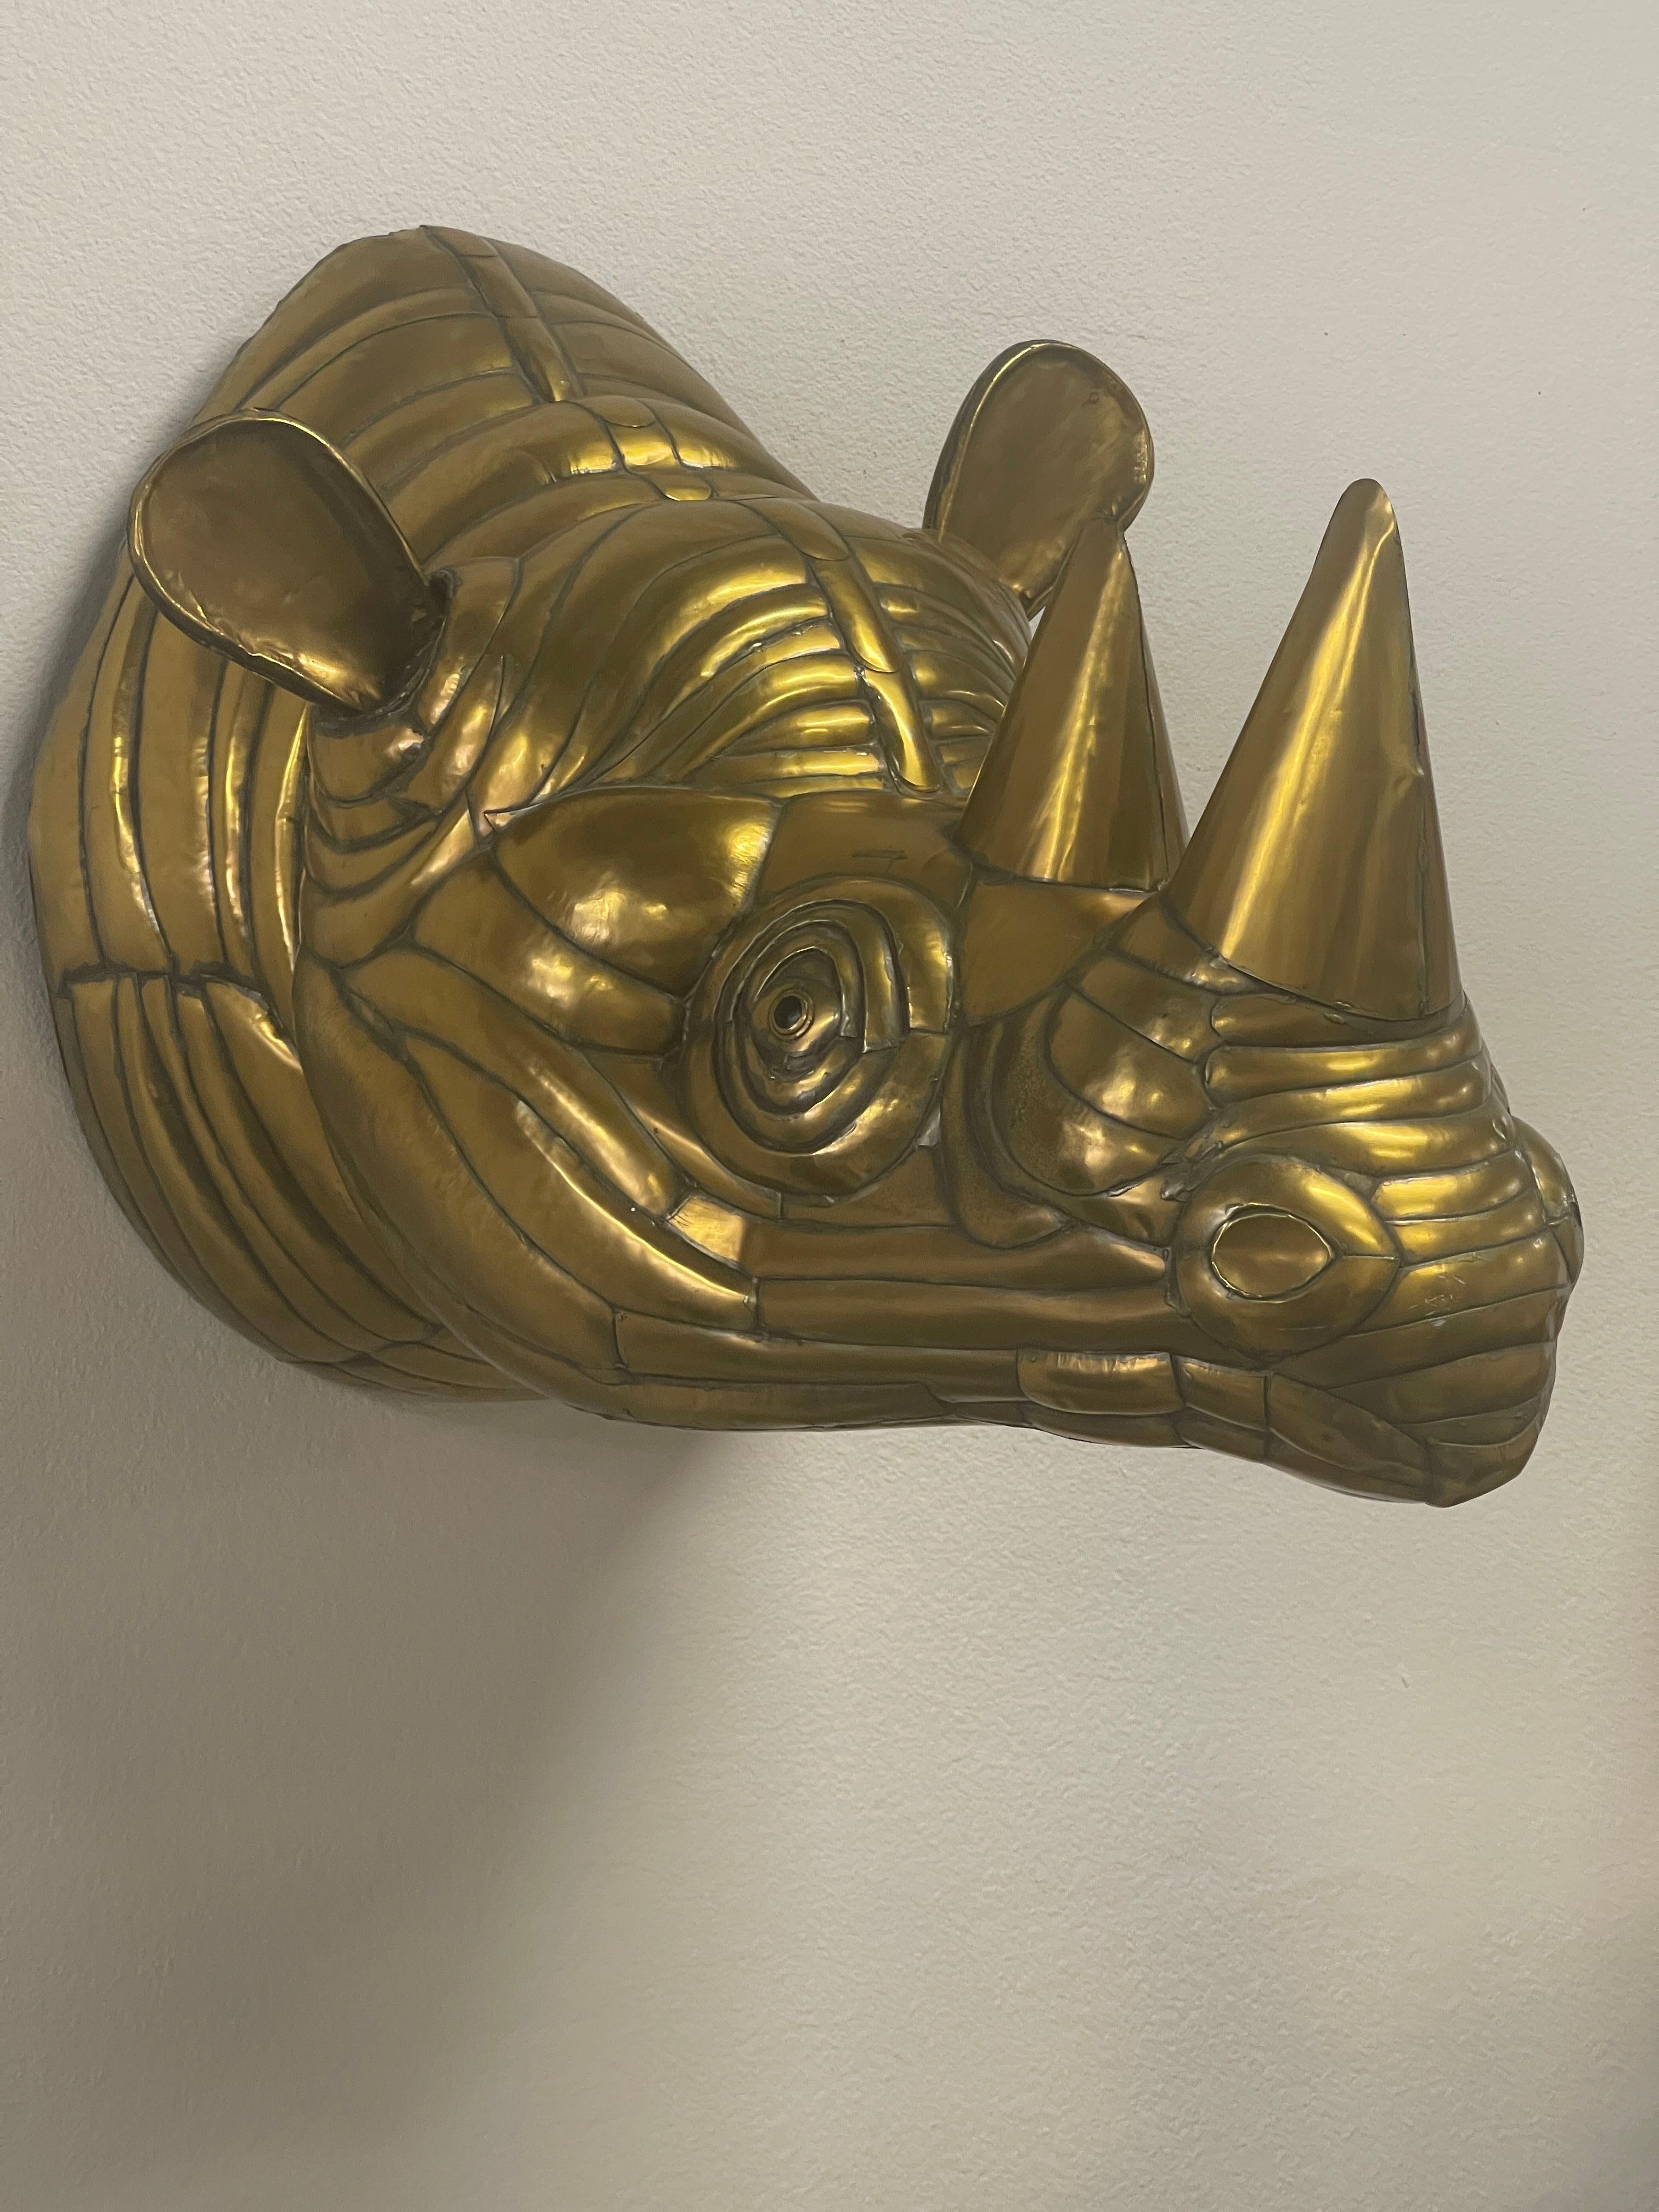 Wonderful brass life size Rhinoceros by Sergio Bustamante. It is not signed but was purchased at a gallery in Mexico in the 1980’s. We had a nice collection of animals along with this one with certificates, none of which were signed. The certificate